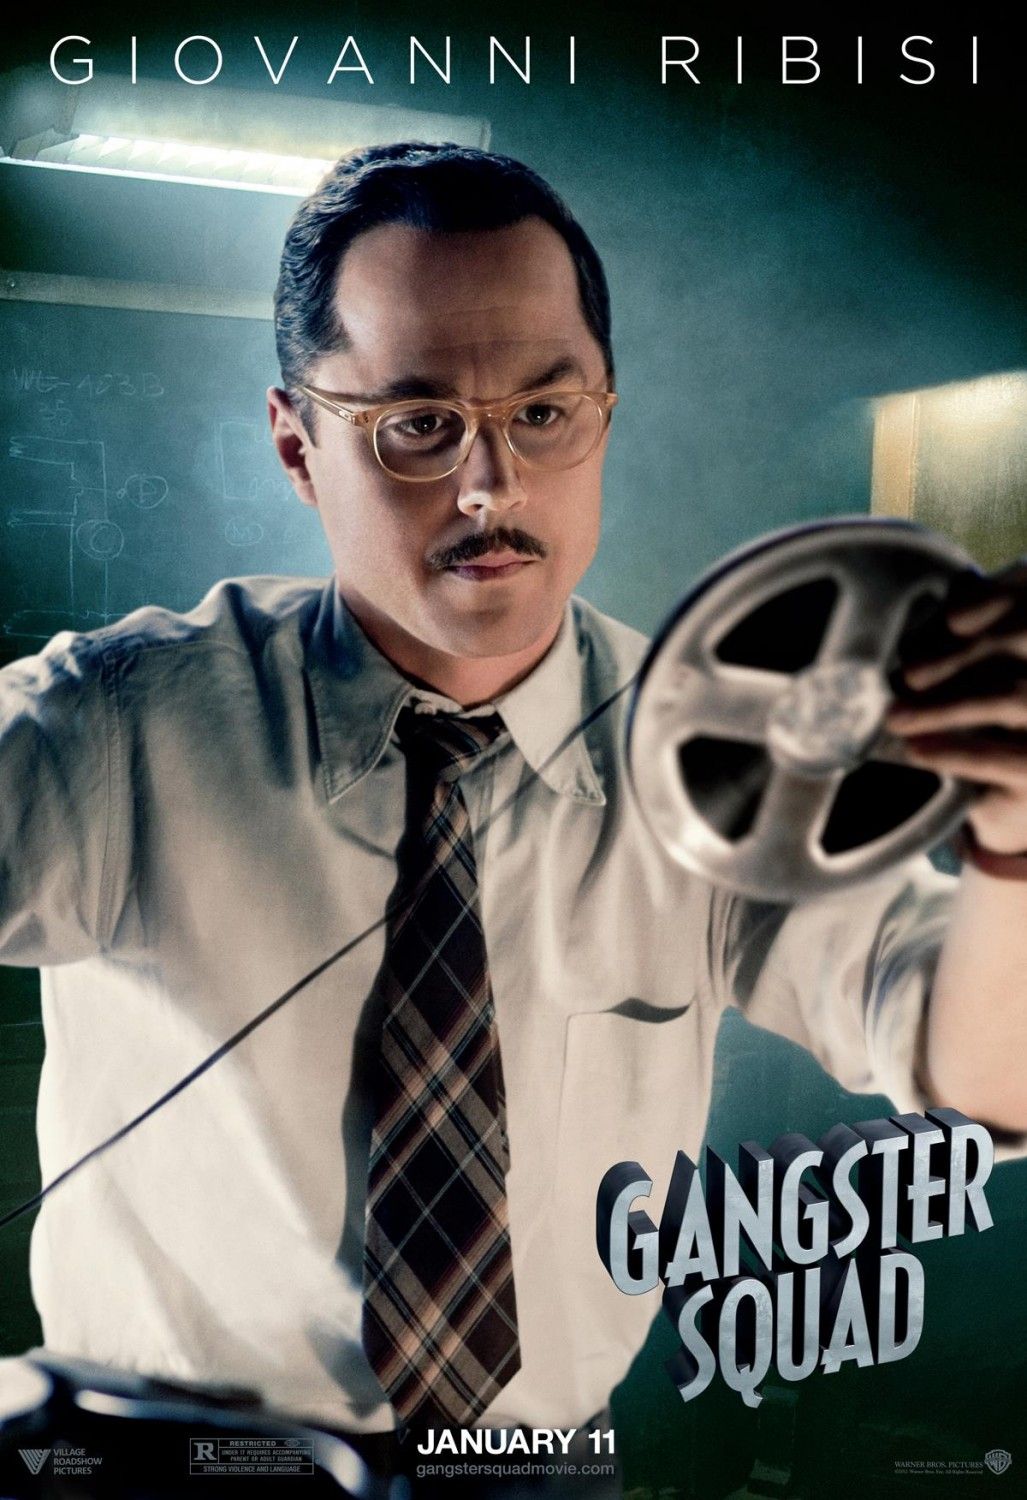 Gangster Squad Character Poster 4